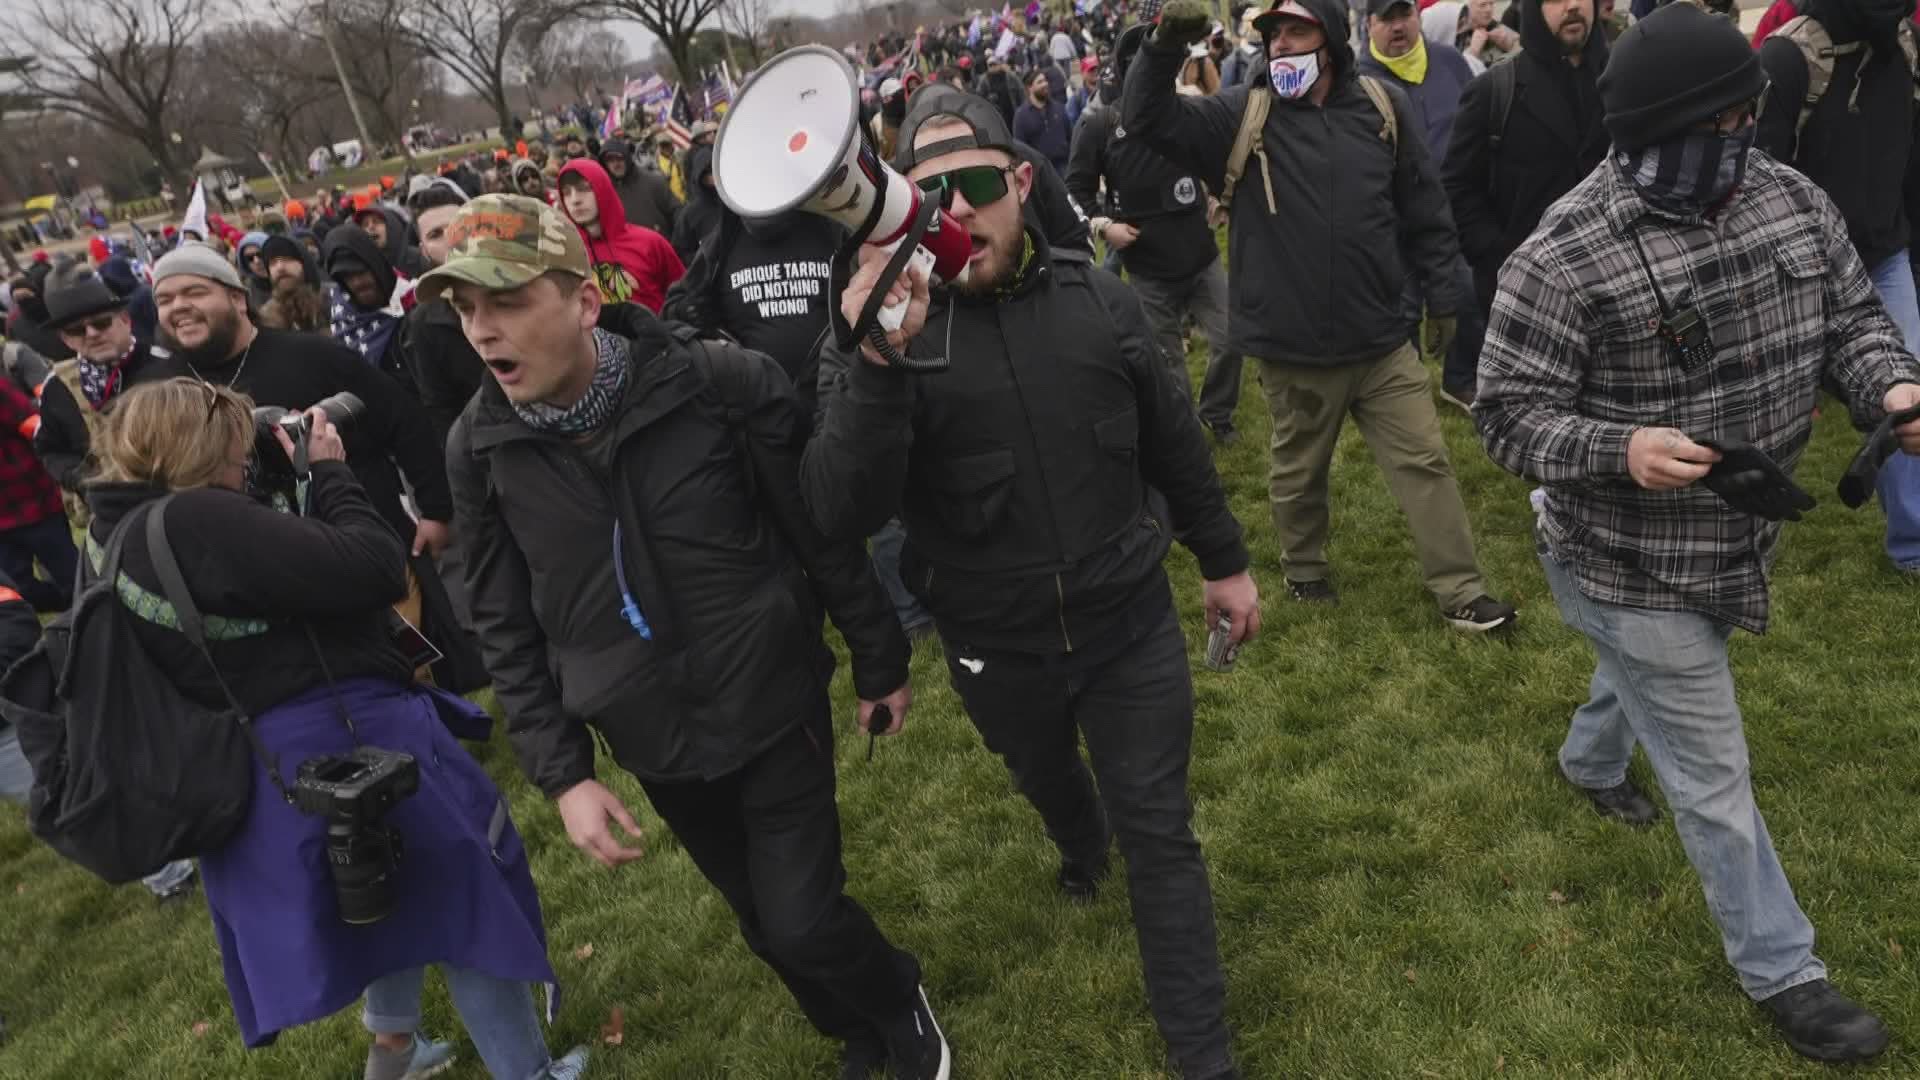 New documents allege Ethan Nordean of Auburn, Wash. was in charge of Proud Boys who stormed the U.S. Capitol.